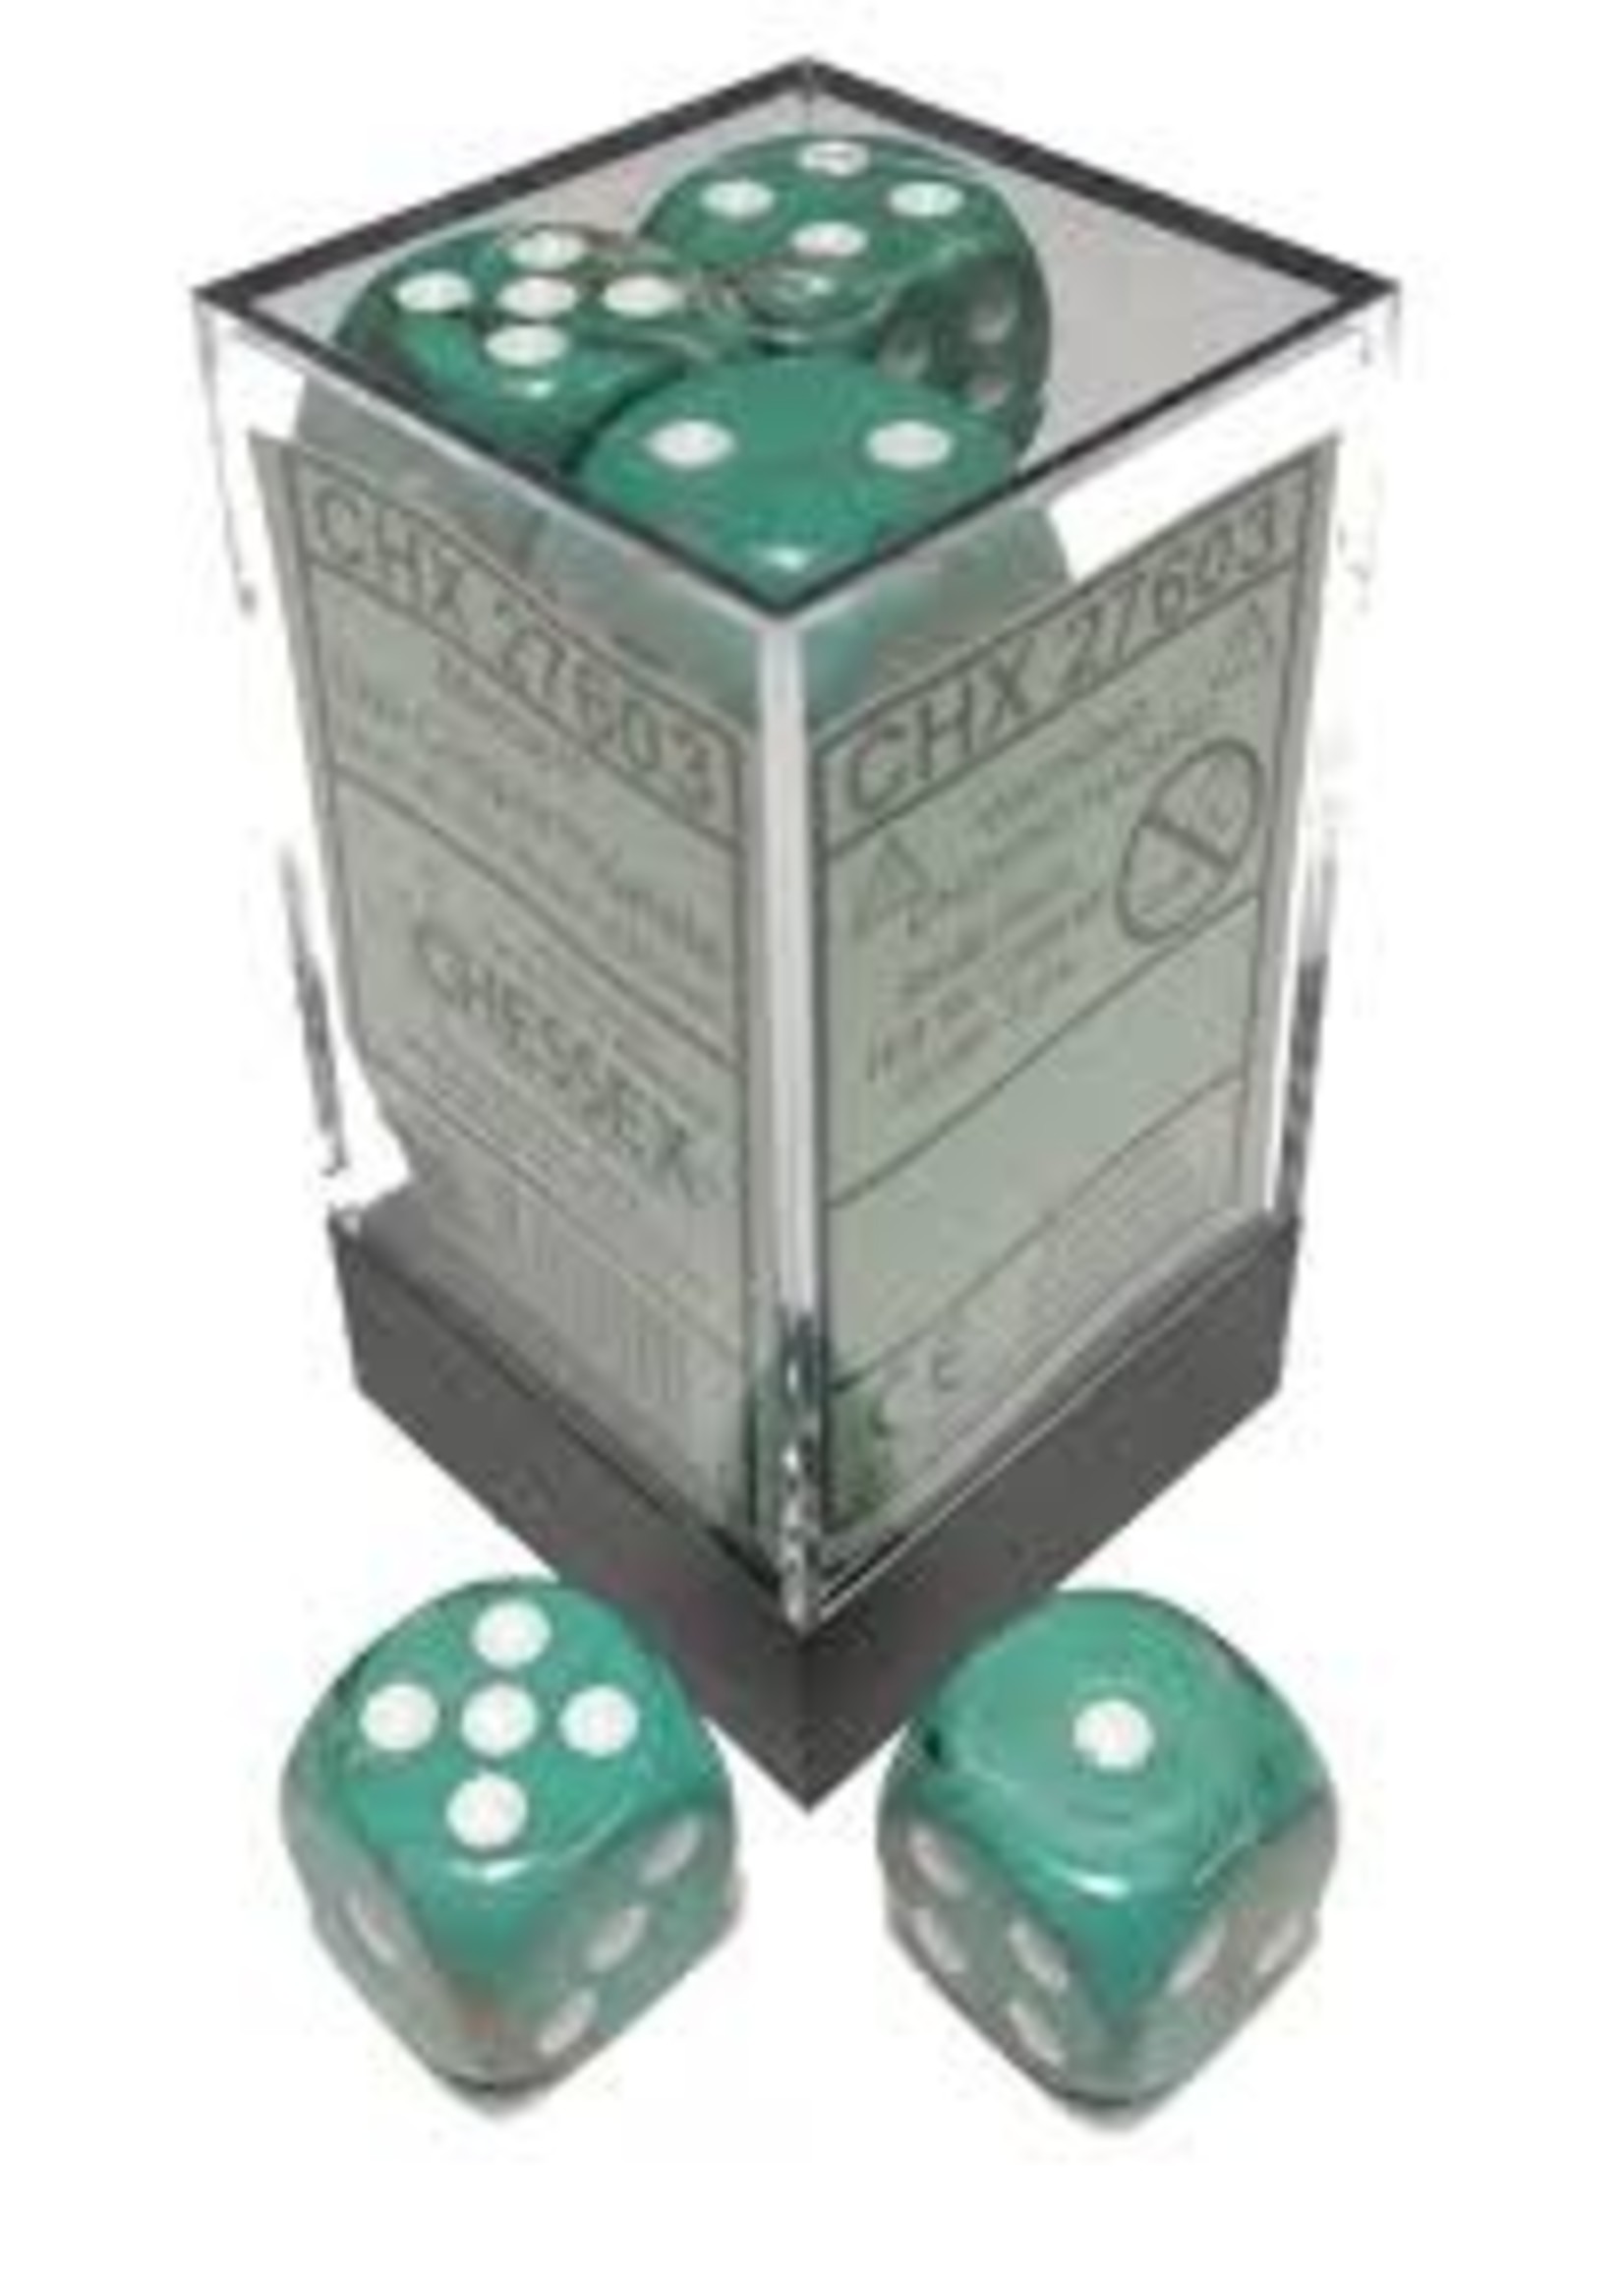 Chessex Chessex "Marble" Dice Sets